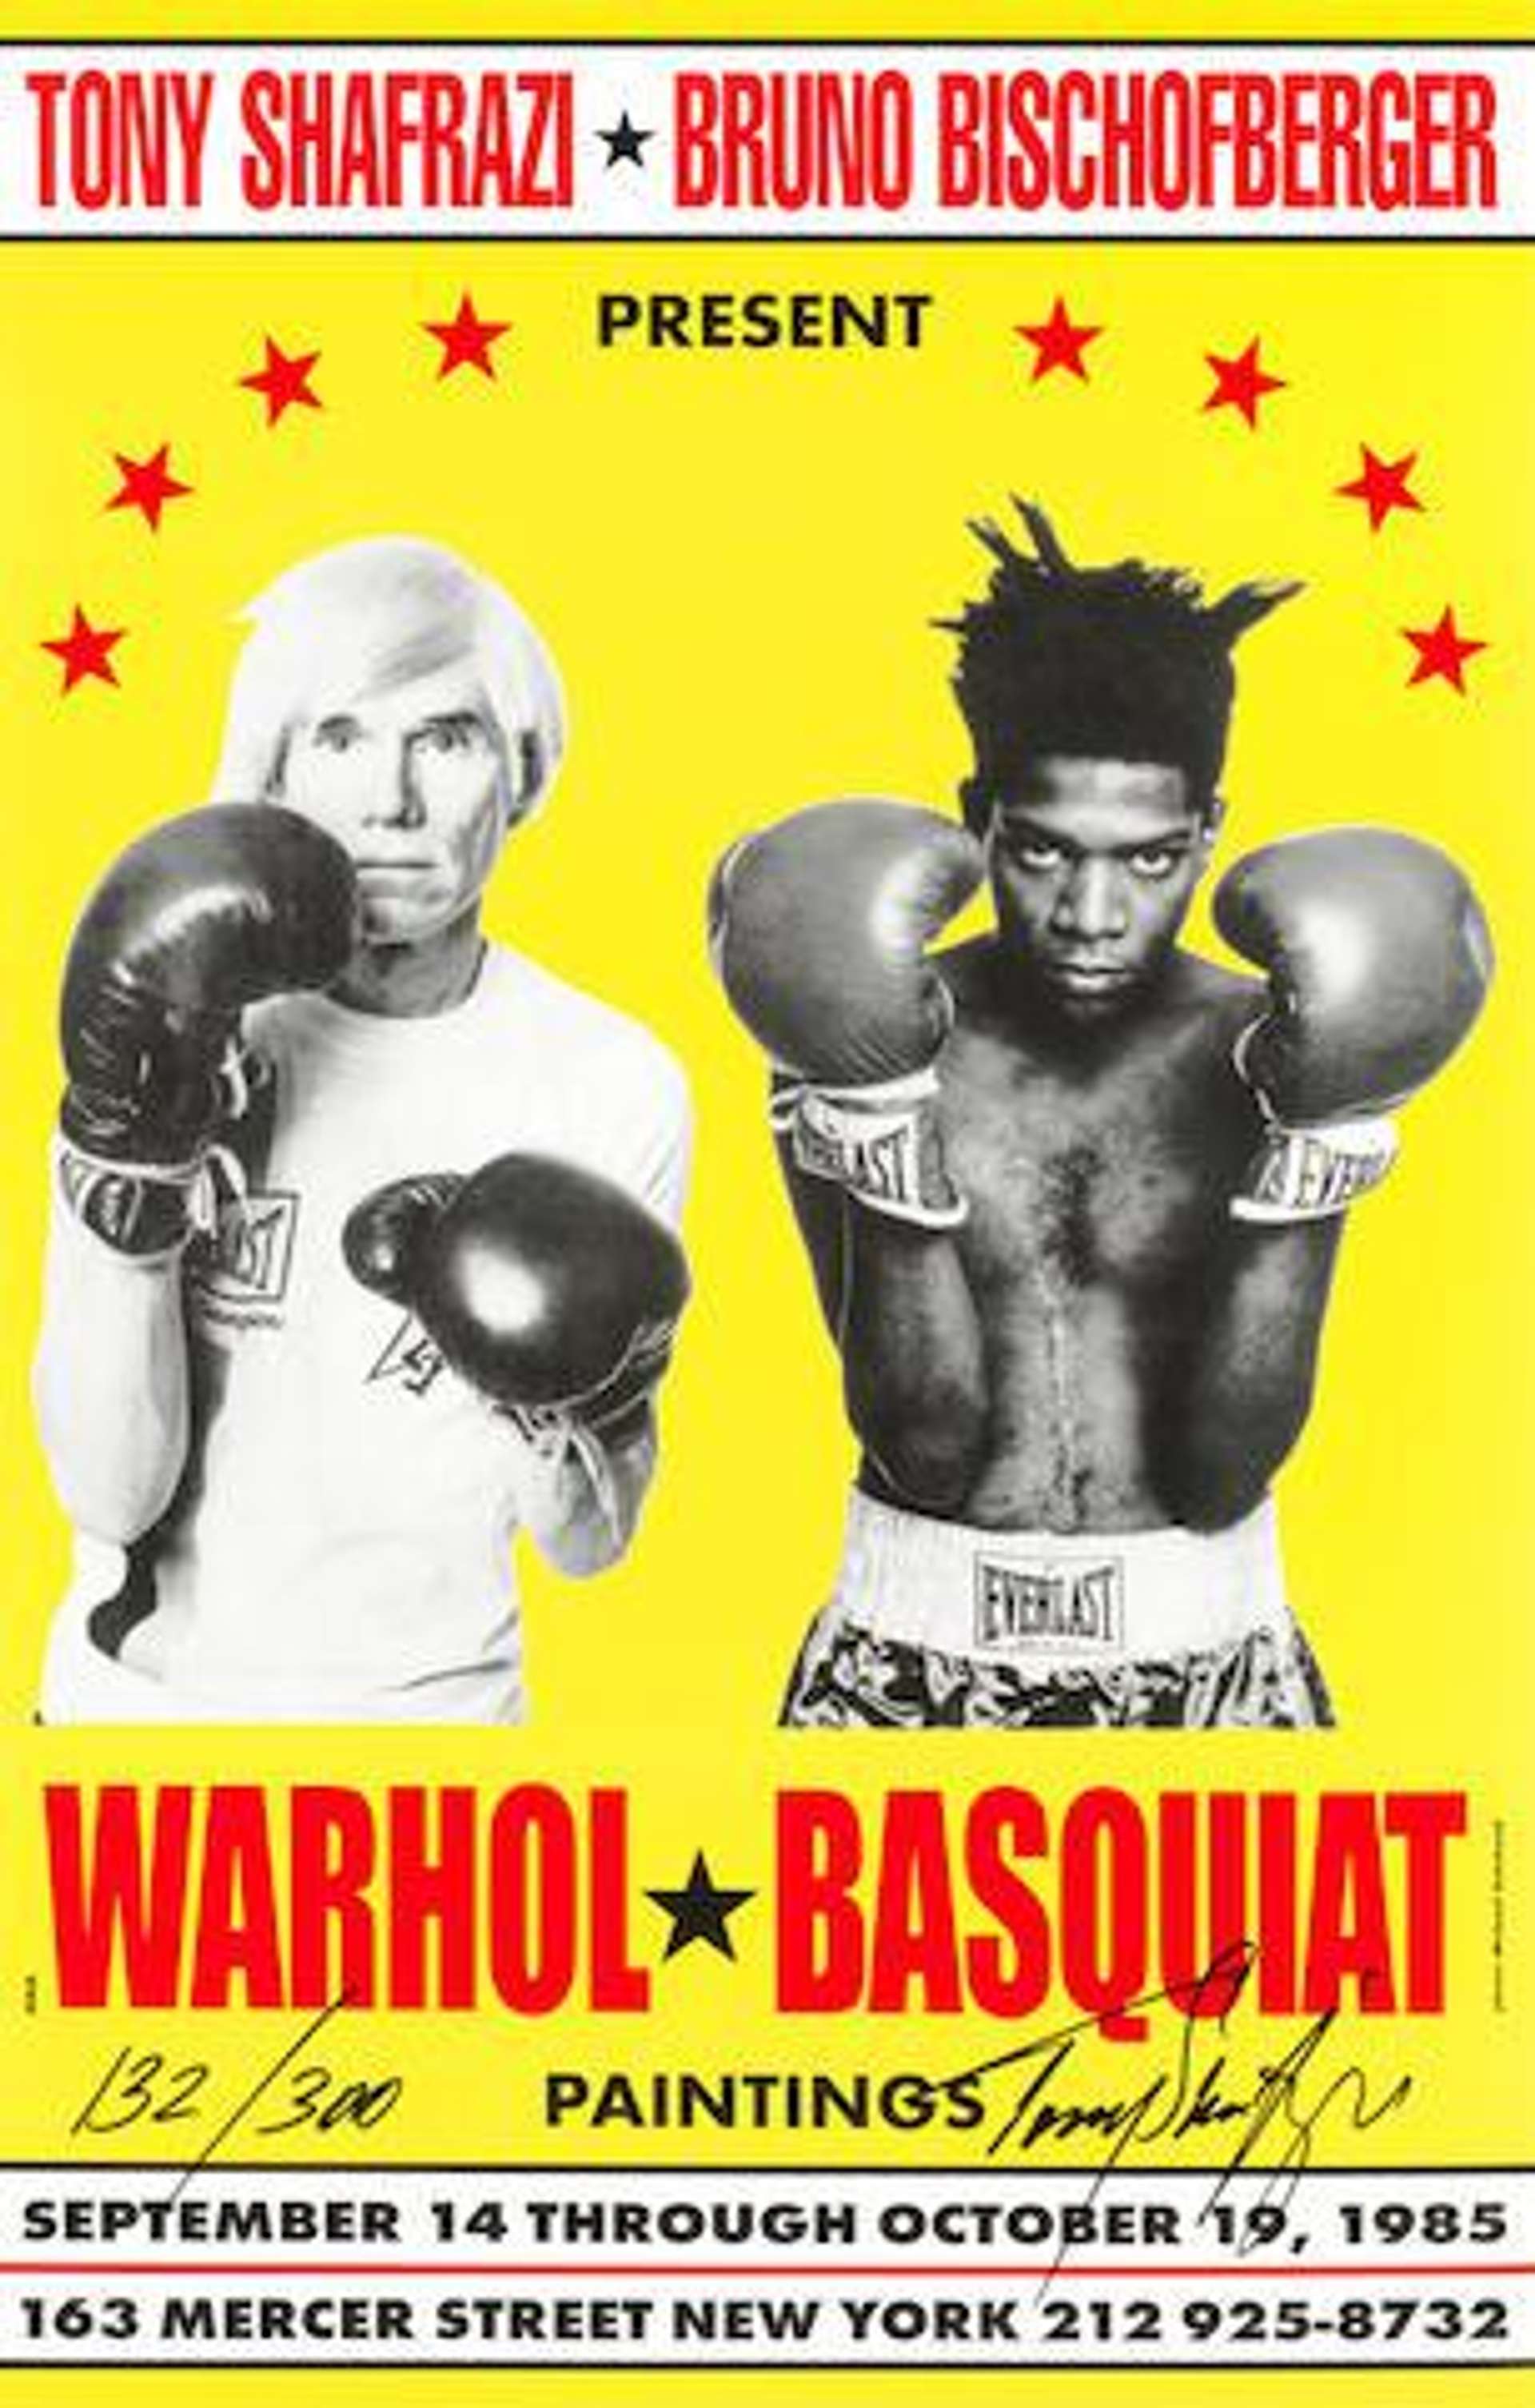 An image of the artists Andy Warhol and Jean Michel Basquiat, wearing boxing attire. They are depicted in black and white against a bright yellow background.